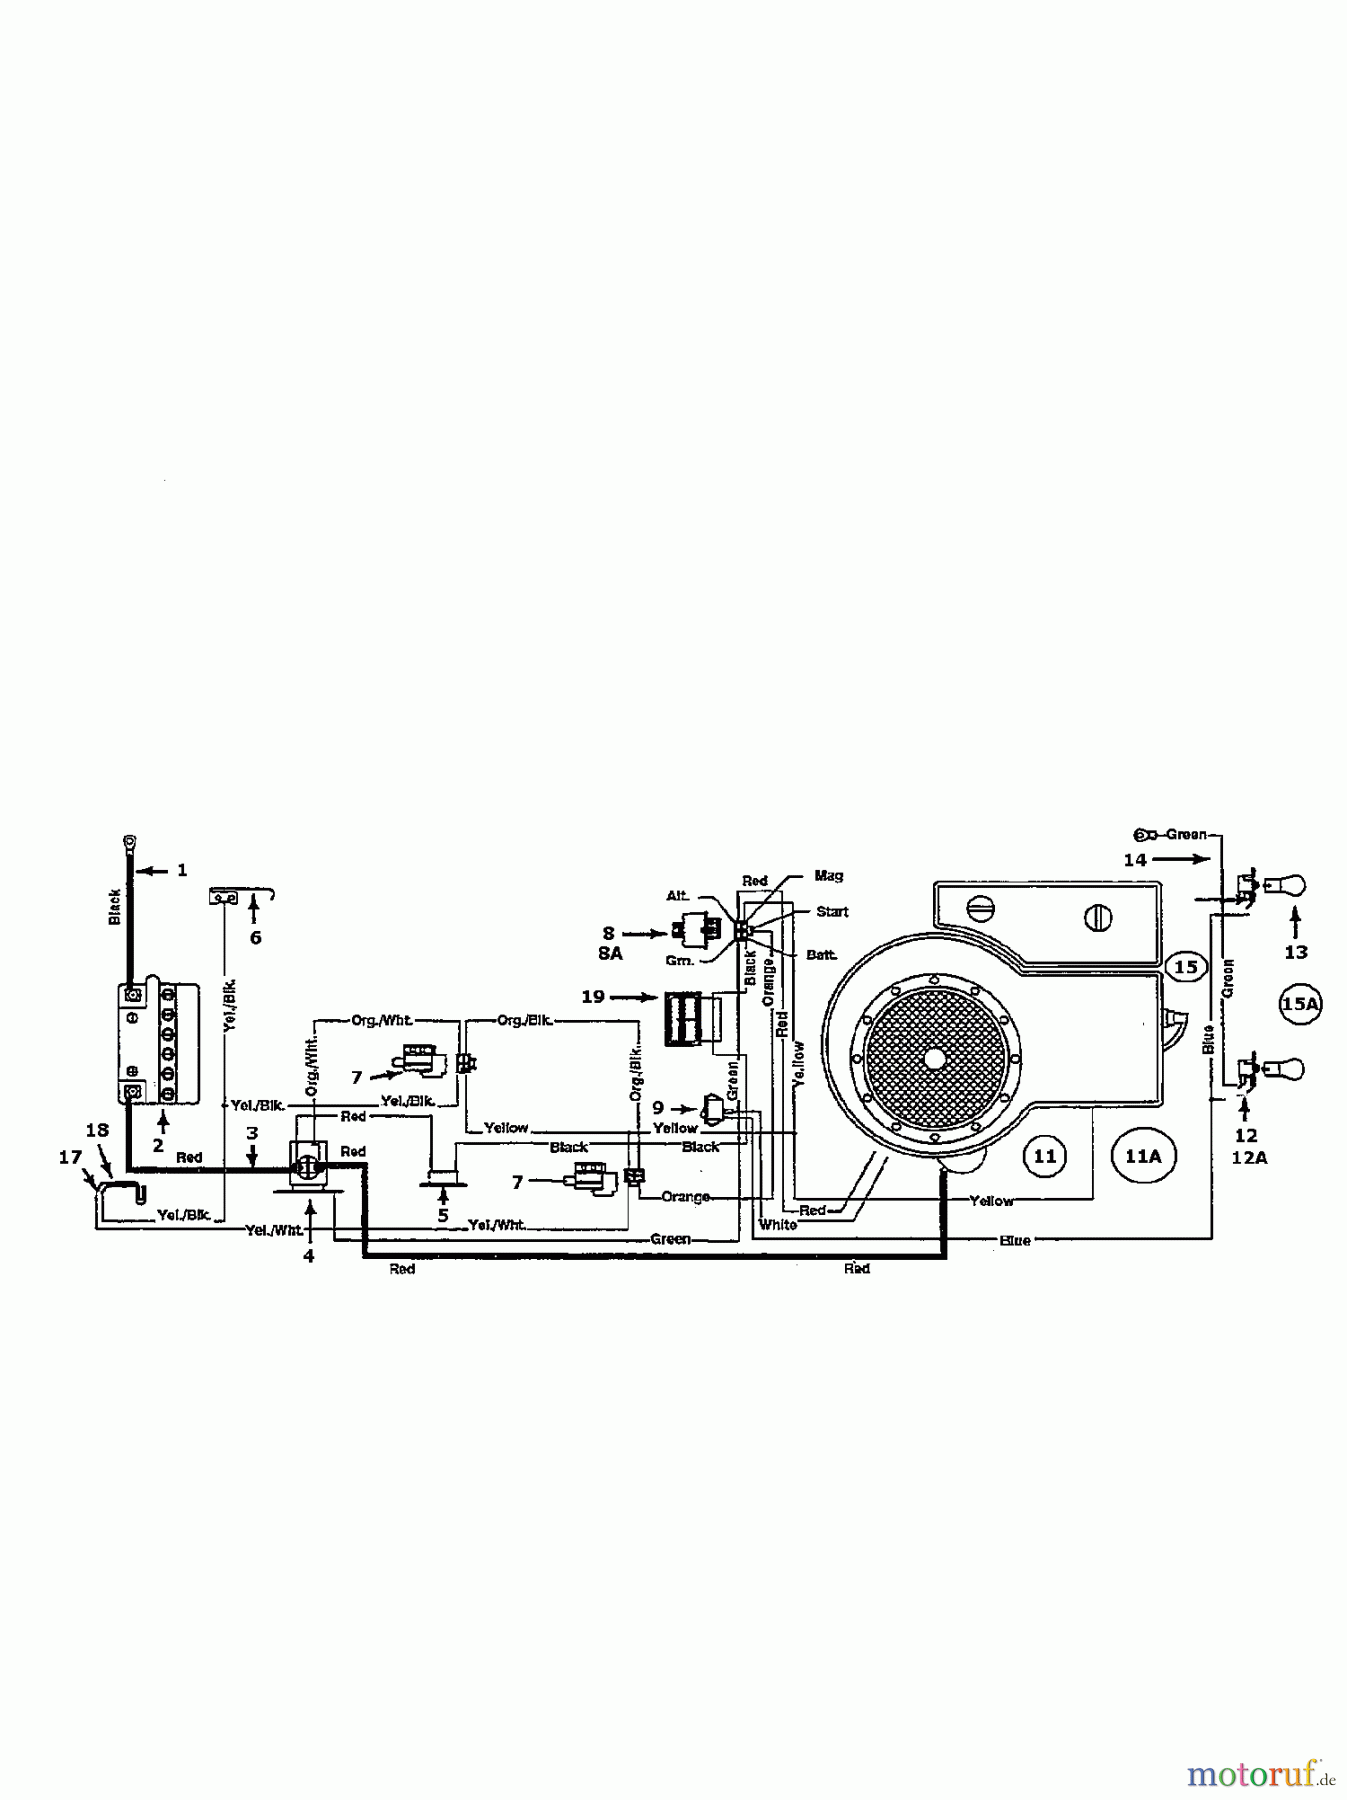  Agria Lawn tractors 4600/91 135L450E609  (1995) Wiring diagram single cylinder